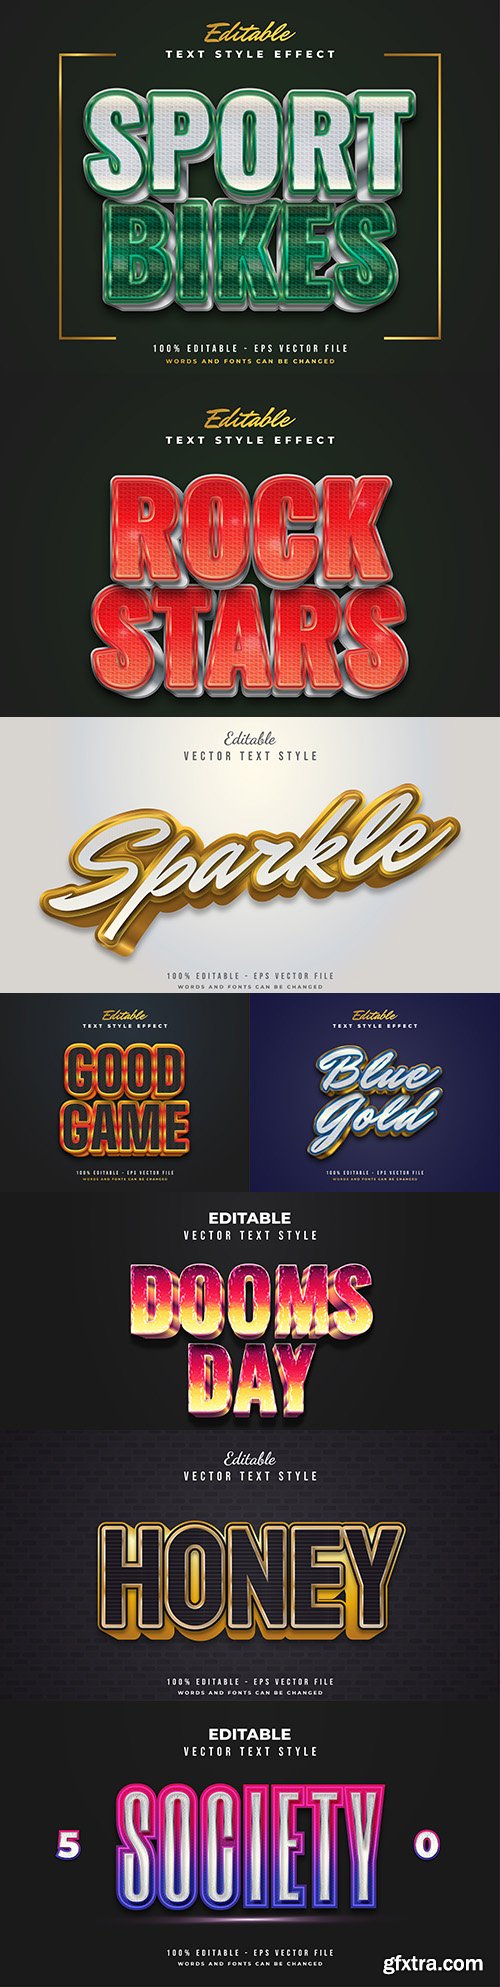 Editable font and 3d effect text design collection illustration 48